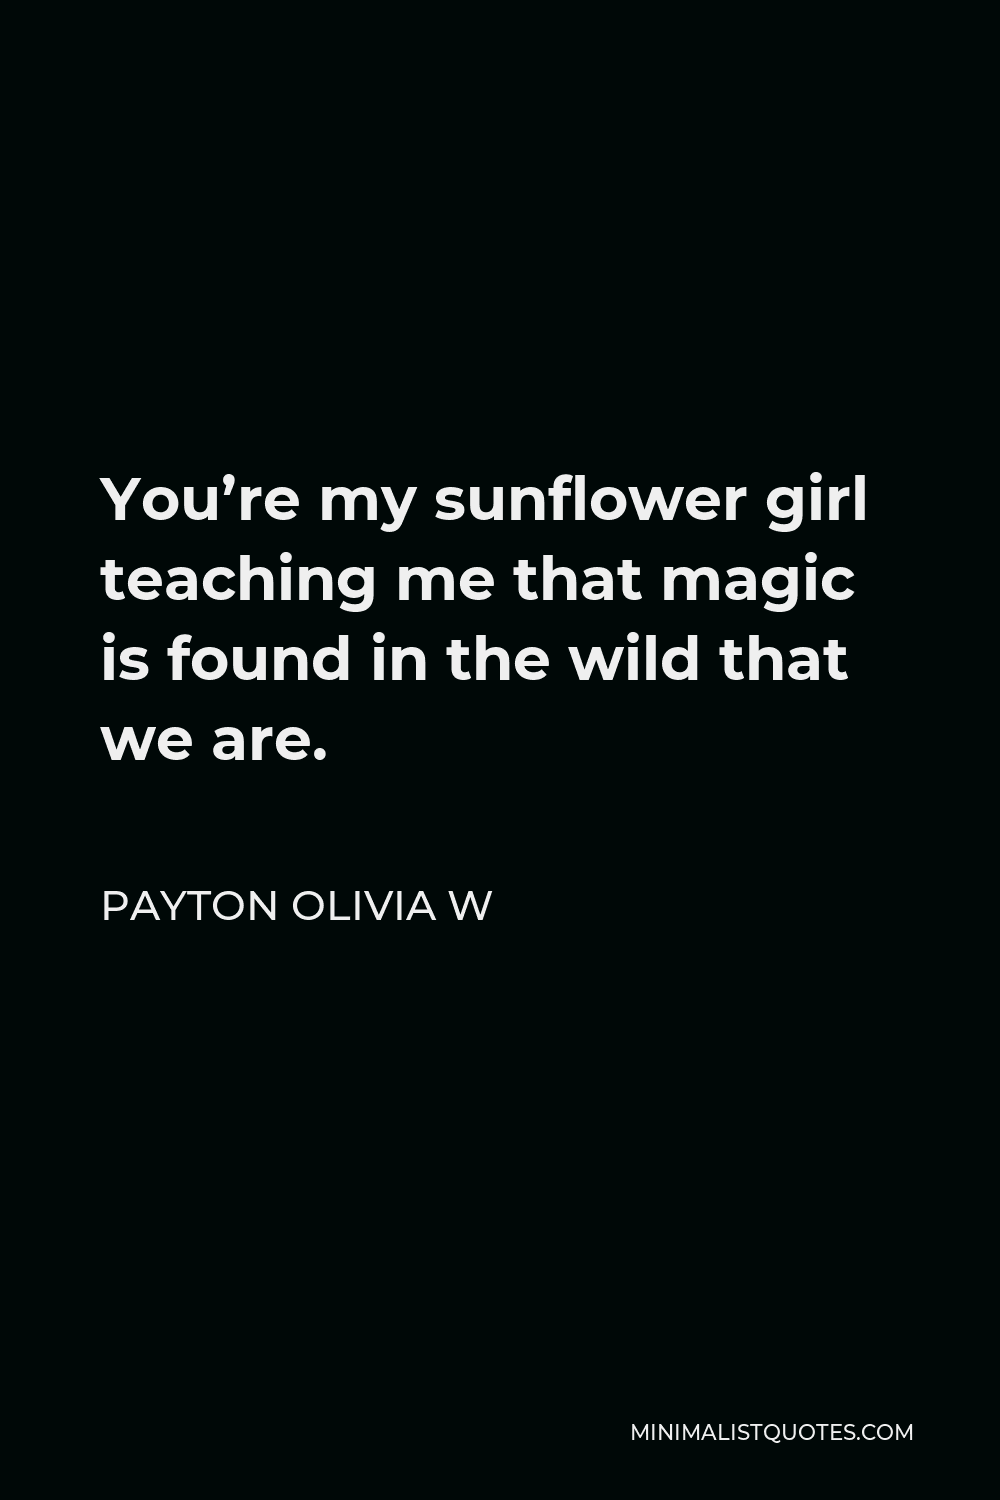 Payton Olivia W Quote - You’re my sunflower girl teaching me that magic is found in the wild that we are.